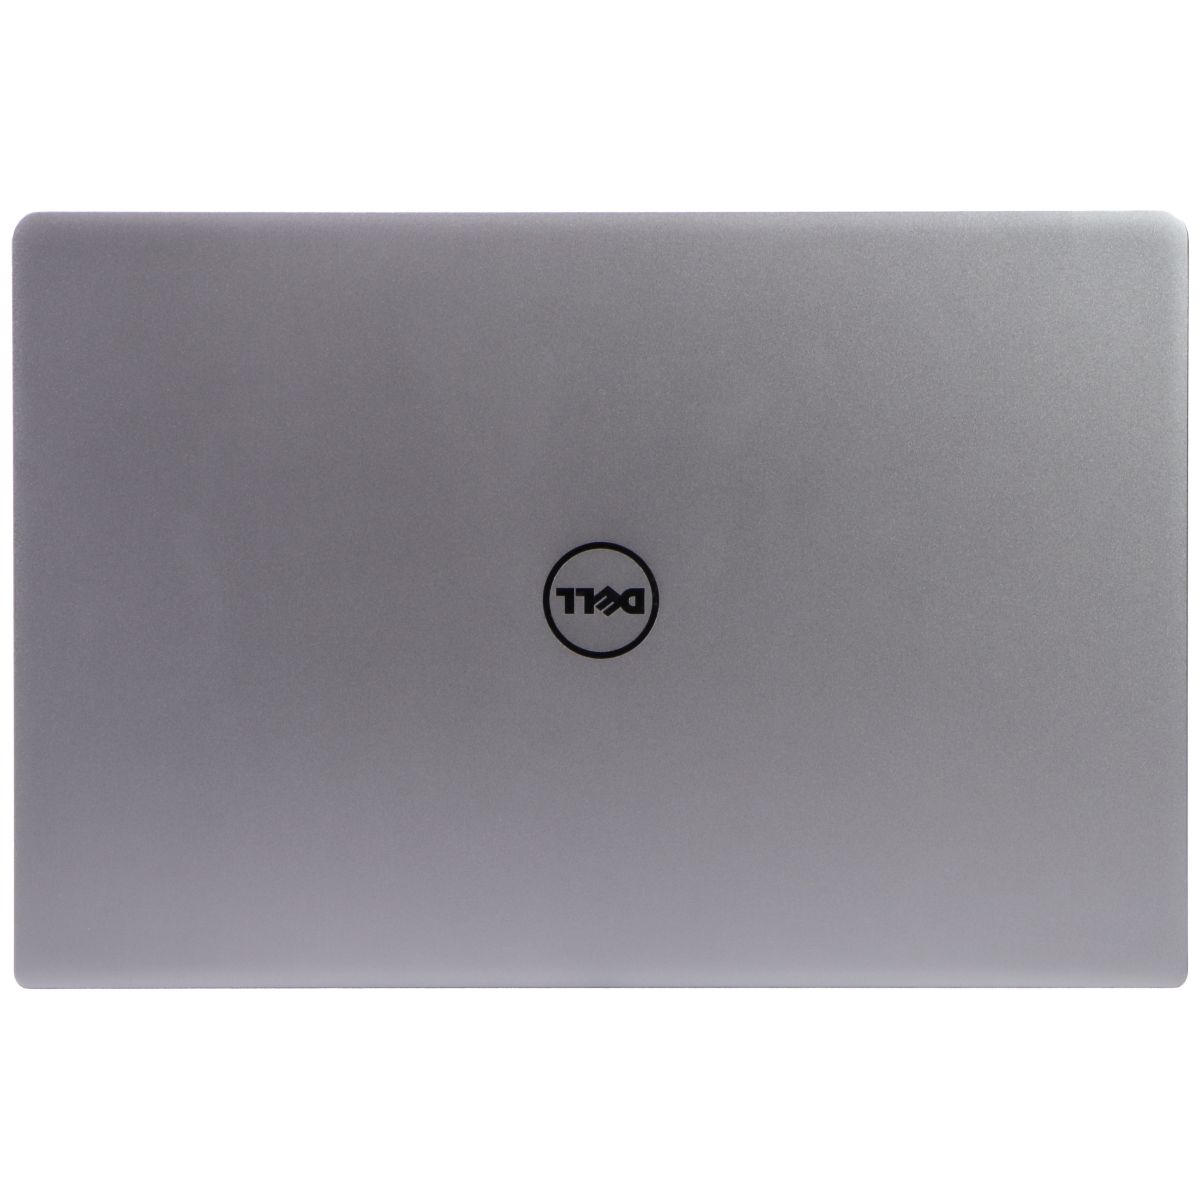 Dell XPS 13 9360 (13.3-in) FHD Laptop (P54G002) i7-7560U/256GB/8GB/10 Home Laptops - PC Laptops & Netbooks Dell    - Simple Cell Bulk Wholesale Pricing - USA Seller